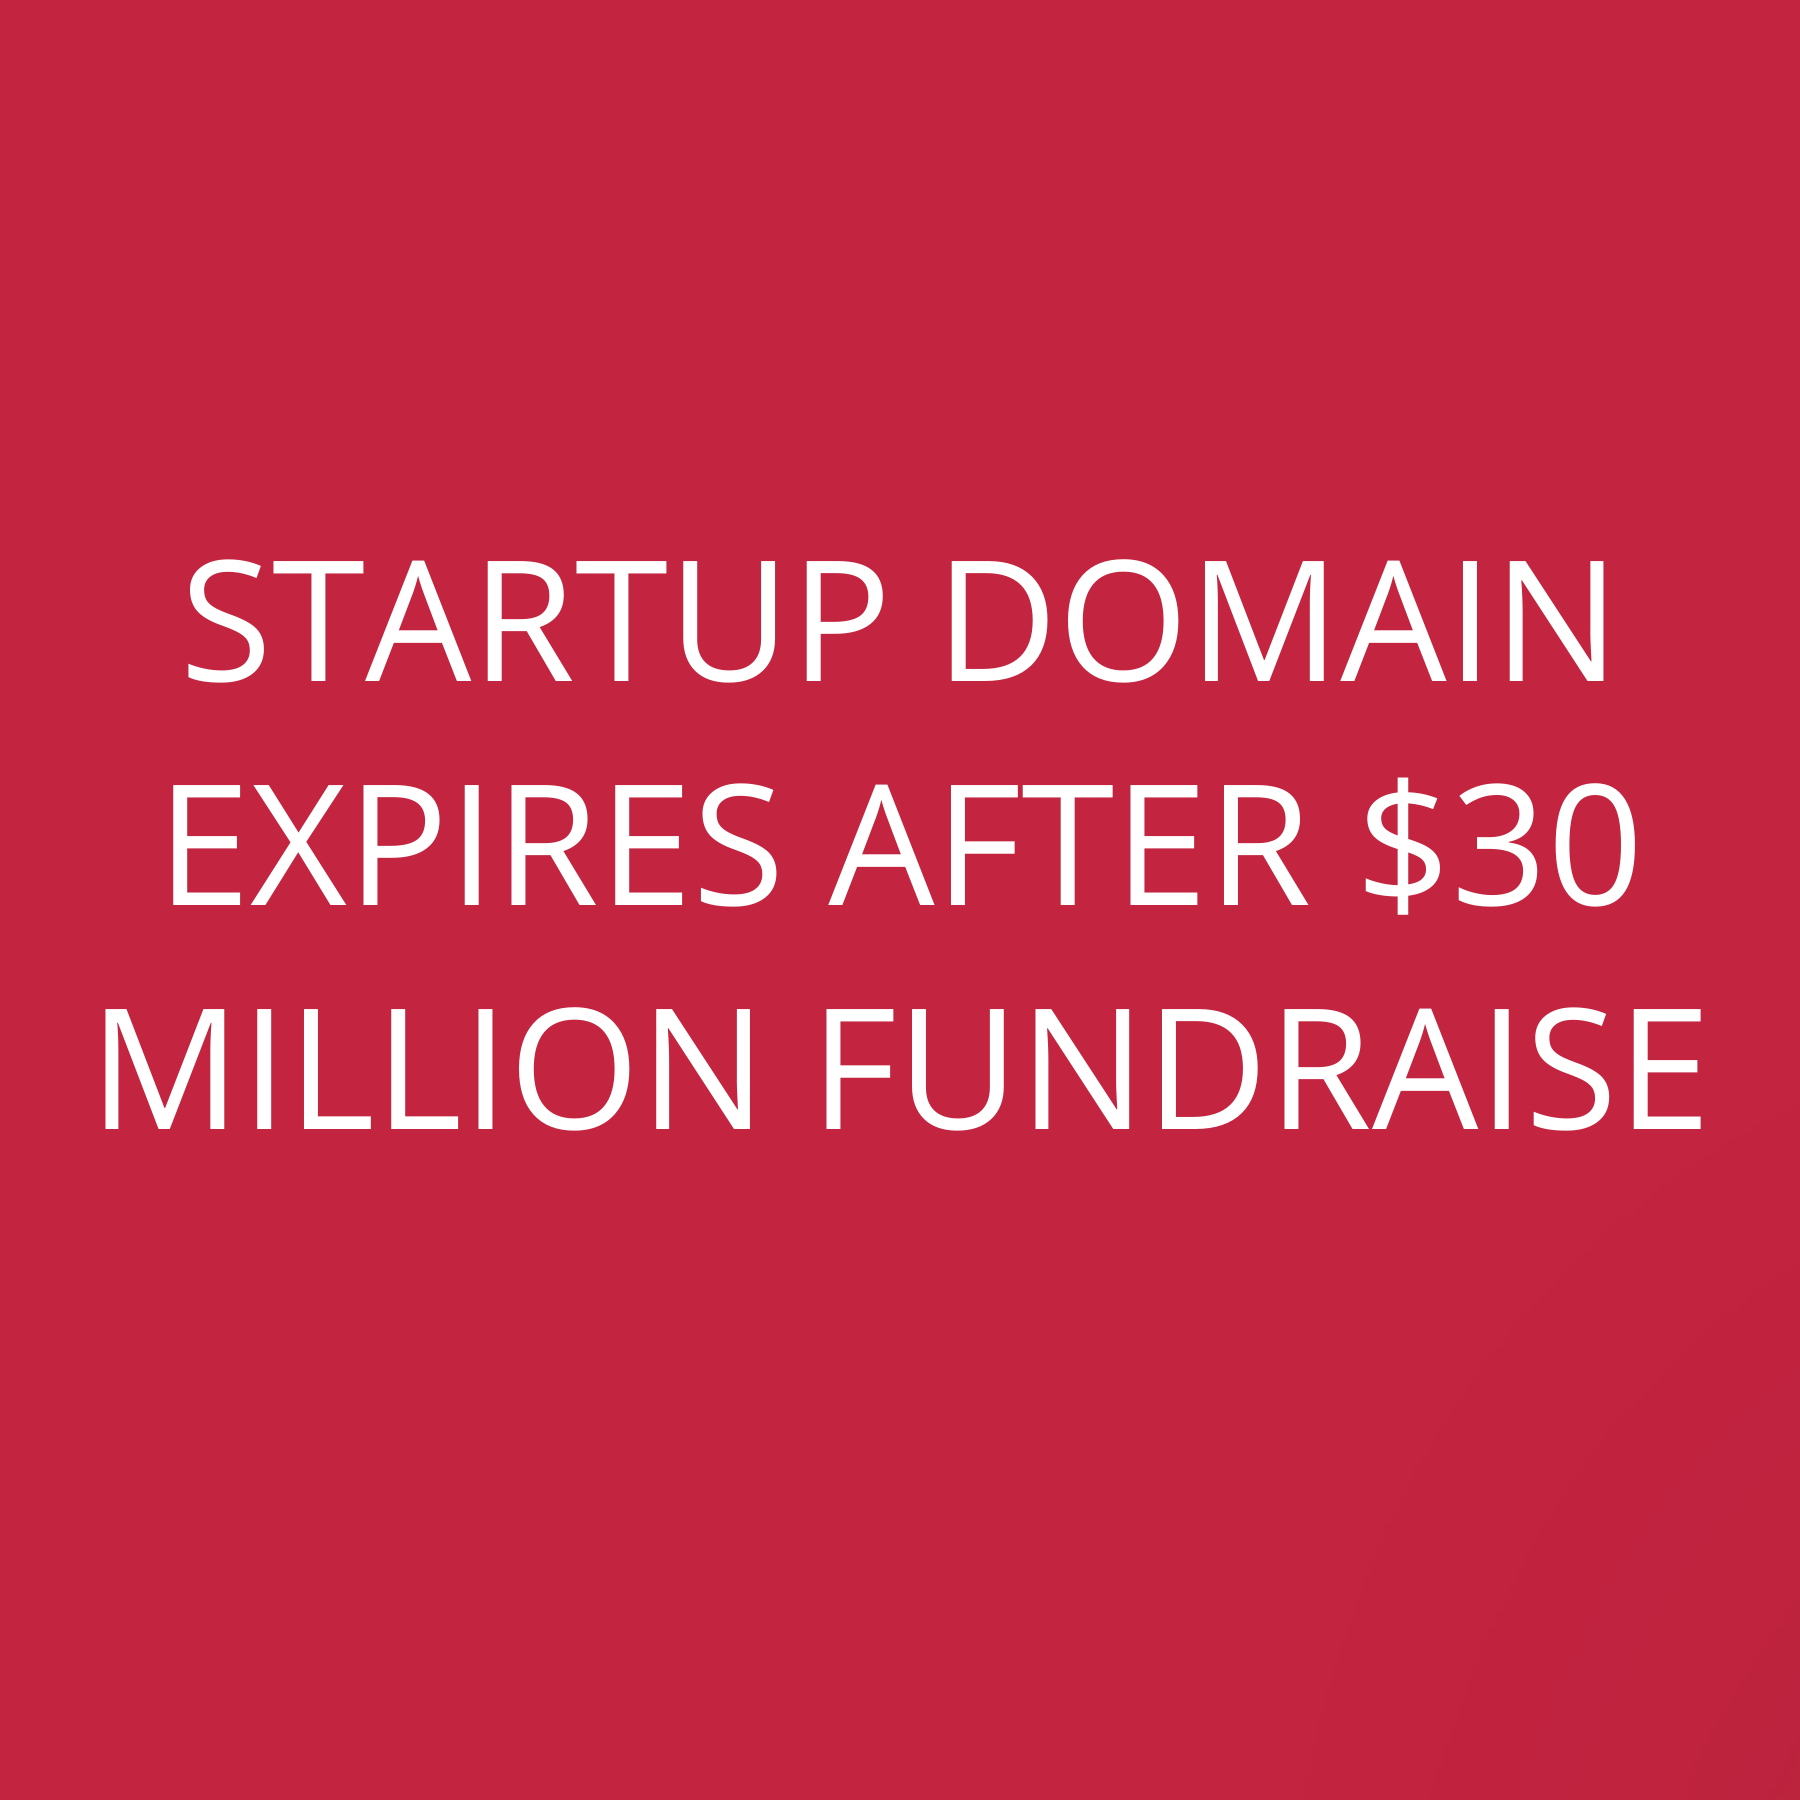 Startup domain expires after $30 Million Fundraise